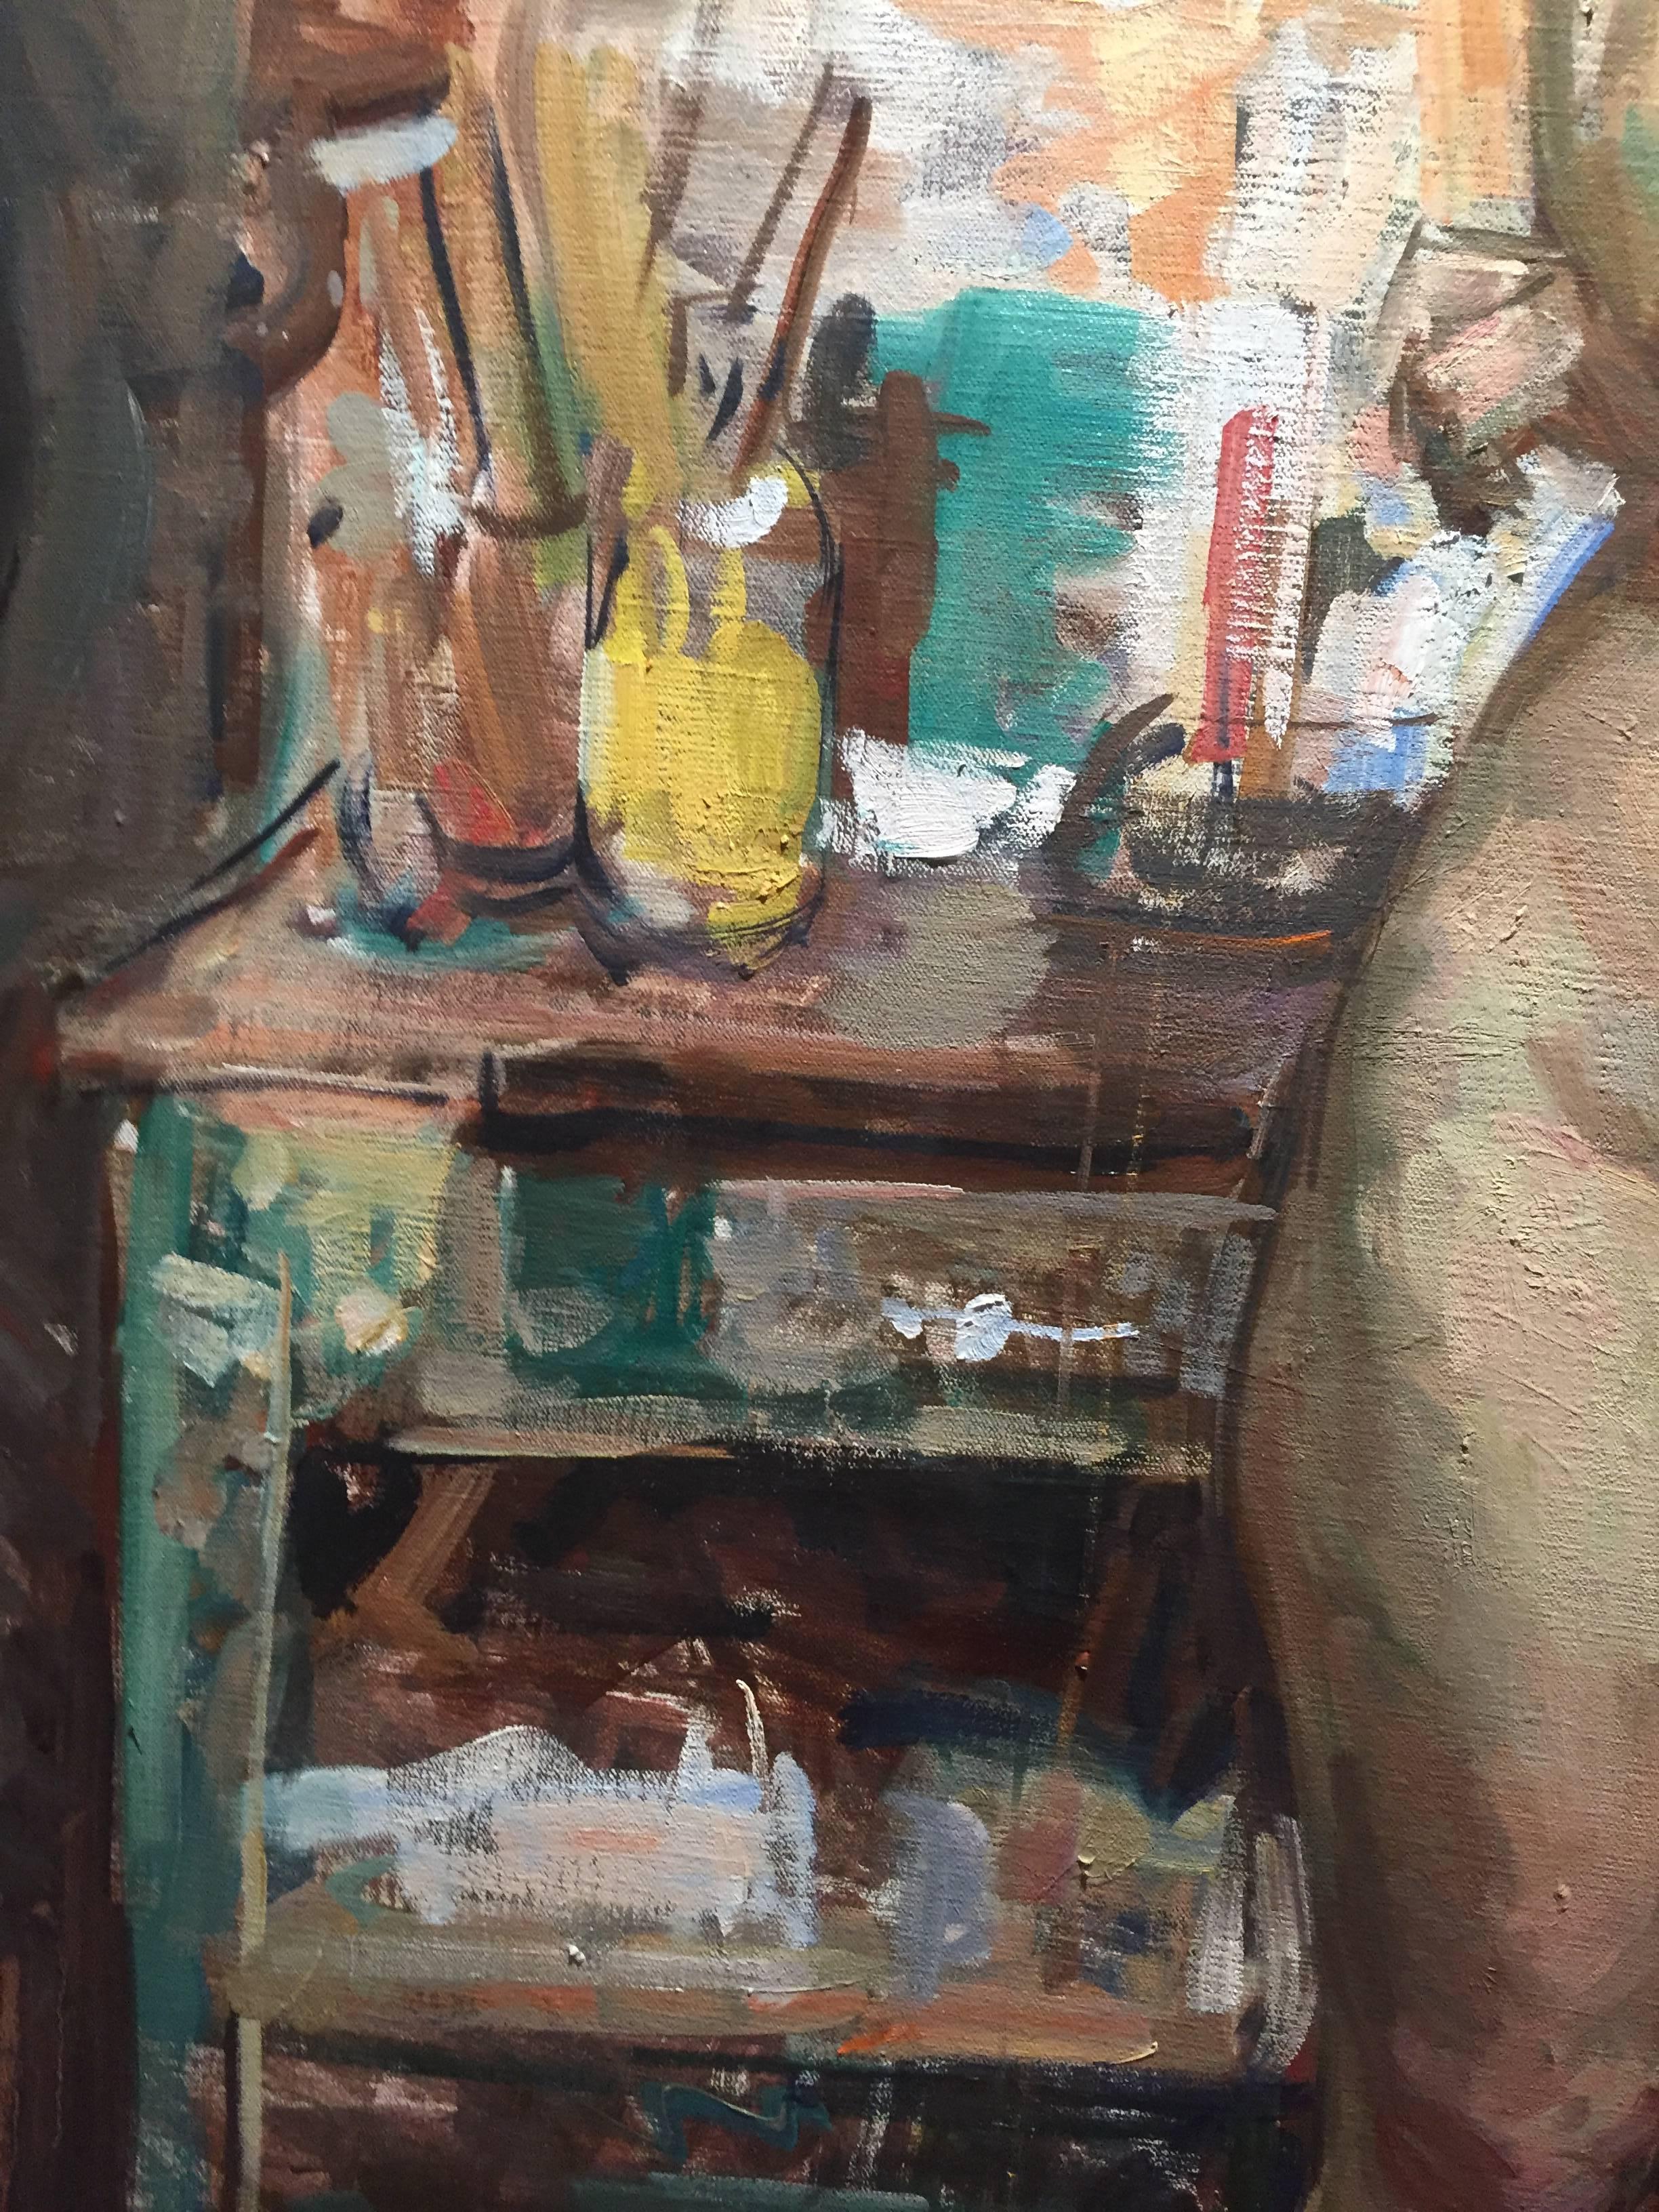 After studying anatomy and academic painting at the Florence Academy of Art, Ben Fenske took the skills he learned and stepped back, putting his own hand into an academically proportionate painting. His loose brushstroke vibrate in color with joy. A